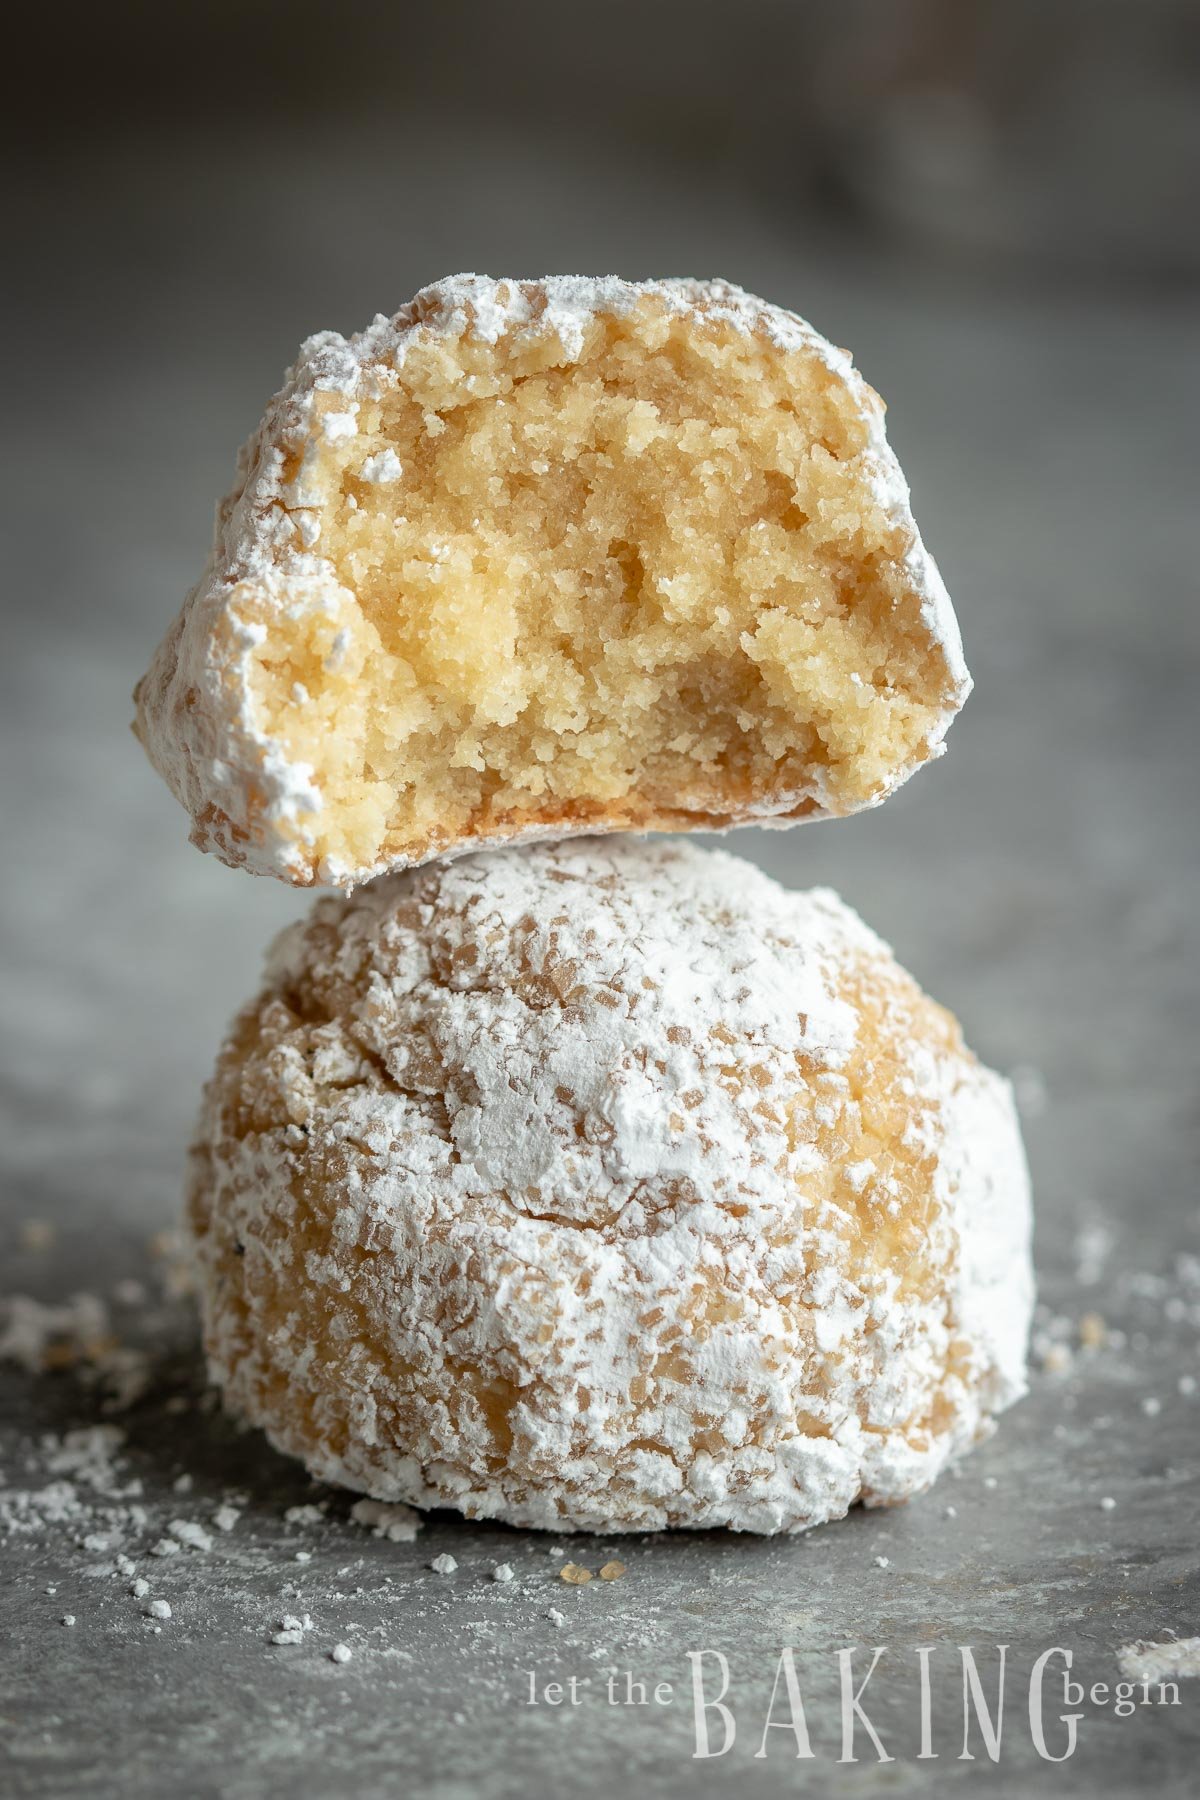 Amaretti Cookies are small gluten and dairy-free confections that are made with egg whites, almond flour and sugar. The cookies can range from crispy like biscotti, to almost chewy texture and have the most amazing almond flavor and aroma.